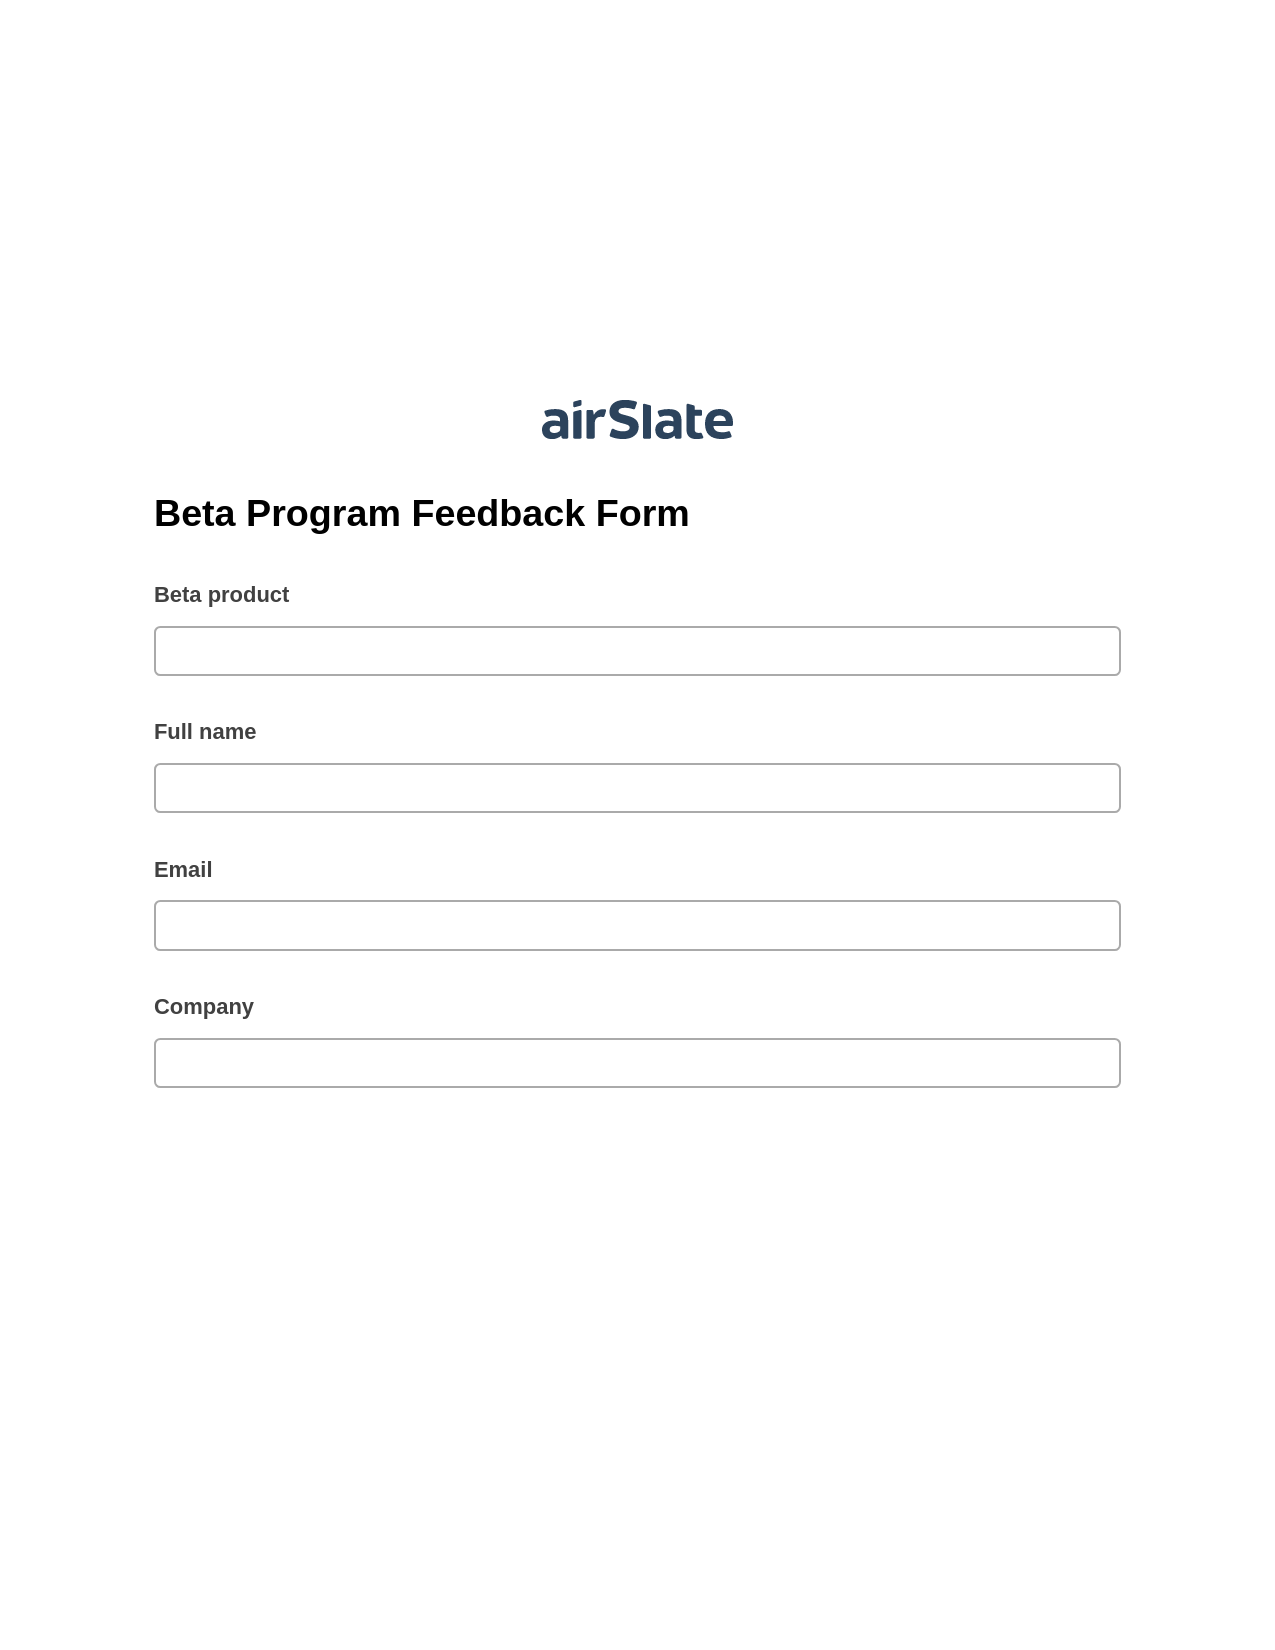 Multirole Beta Program Feedback Form Pre-fill Slate from MS Dynamics 365 Records Bot, Assign Roles to Recipients Bot, Archive to SharePoint Folder Bot